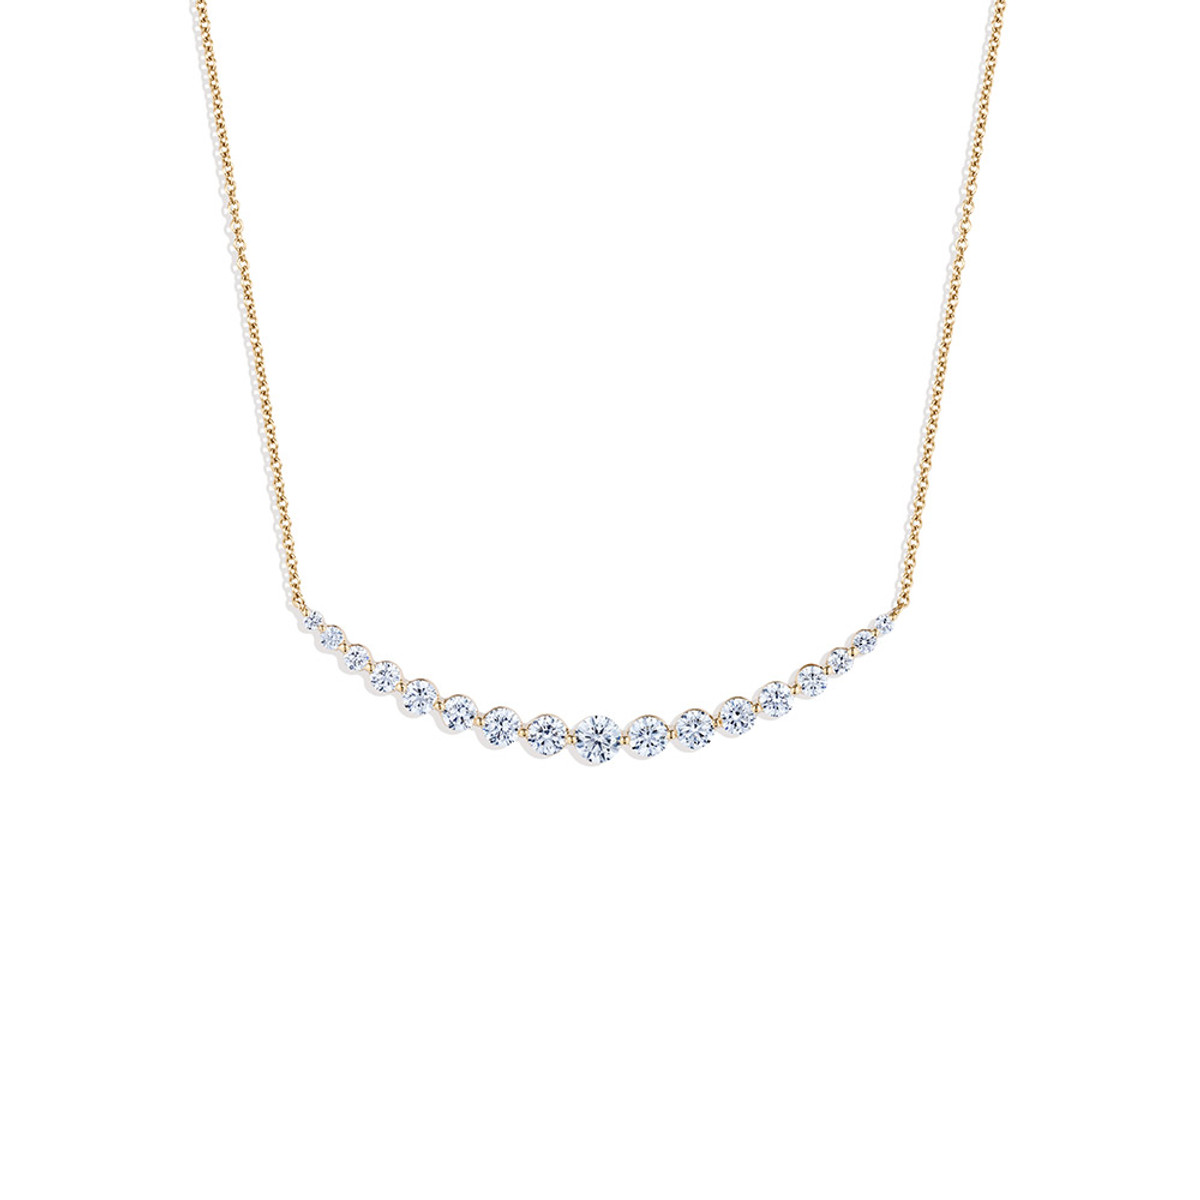 Hyde Park Collection 18K Yellow Gold Diamond Bar Necklace-37473 Product Image